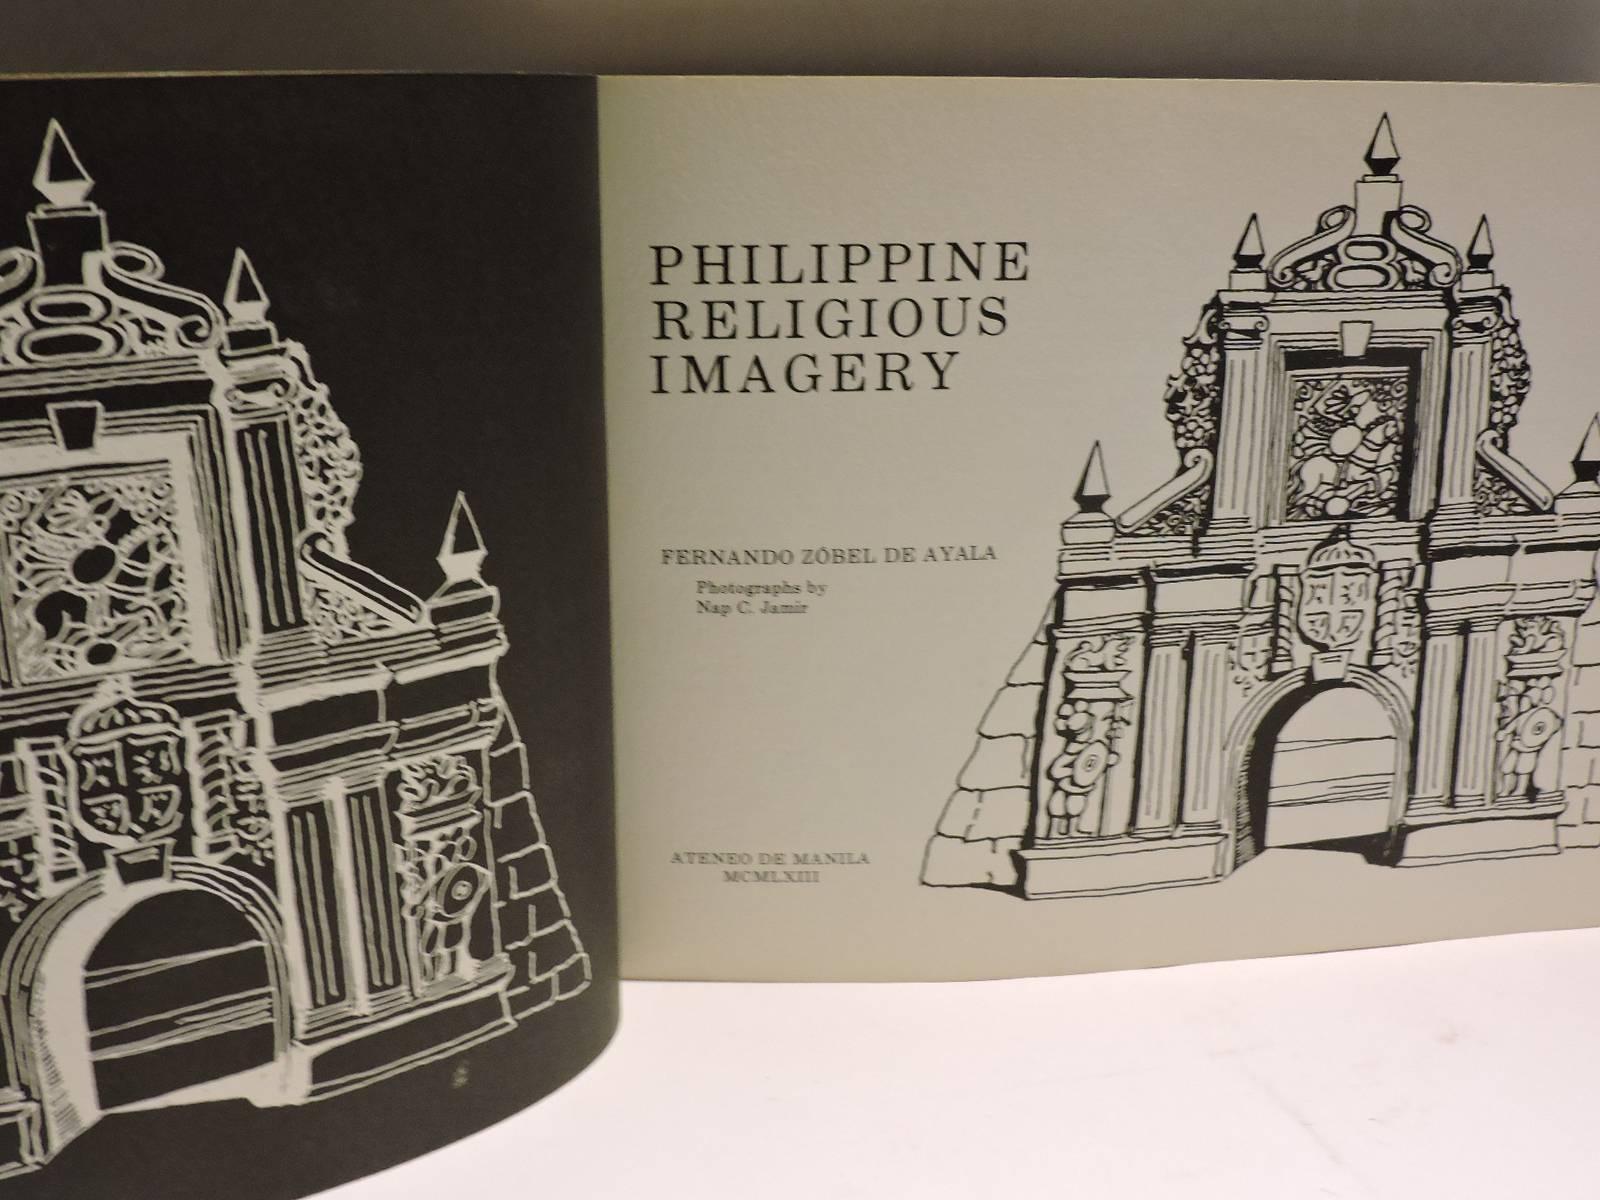 Philippine Religious Imagery by Fernando Zobel De Ayala - a 1st edition - limited to 1500 copies of this hardcover book printed by offset lithography on the presses of Carmelo & Bauermann, Inc. Makati, Rizal Province during this month of March 1963.